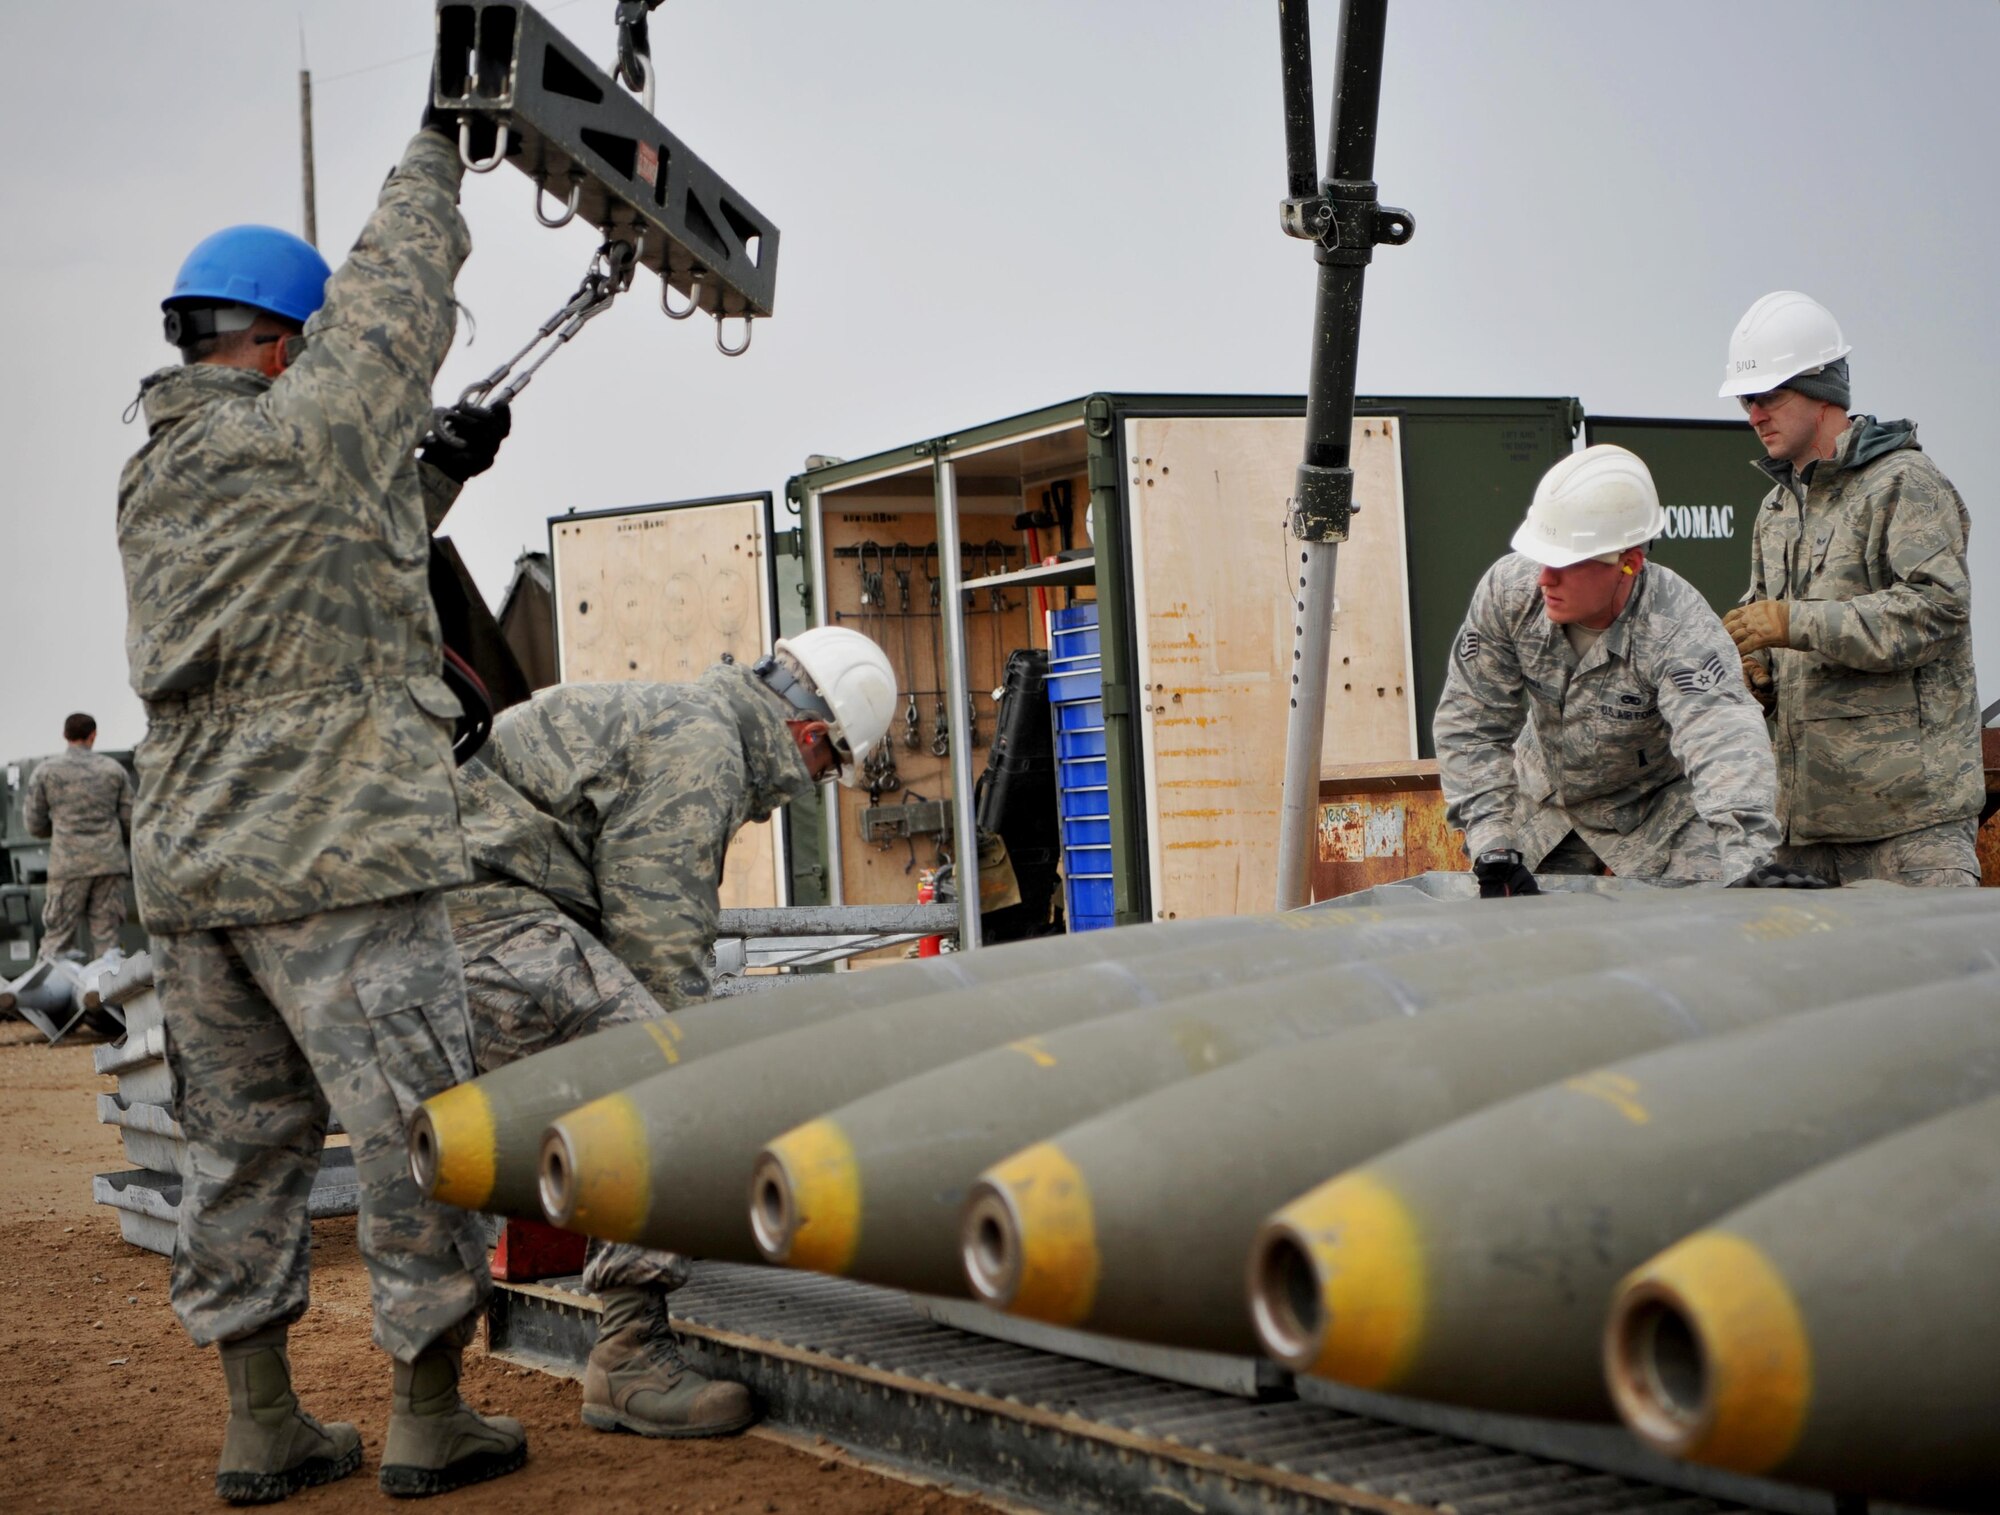 Enlisted Airmen and officers work together to load munitions at the munitions pad Dec. 13, 2016, at Beale Air Force Base, California. The munitions build is part of the Senior Officer Orientation course that immerses and familiarizes officers with the core training enlisted Airmen receive in the munitions career field. (U.S. Air Force photo/Staff Sgt. Jeffrey Schultze) 